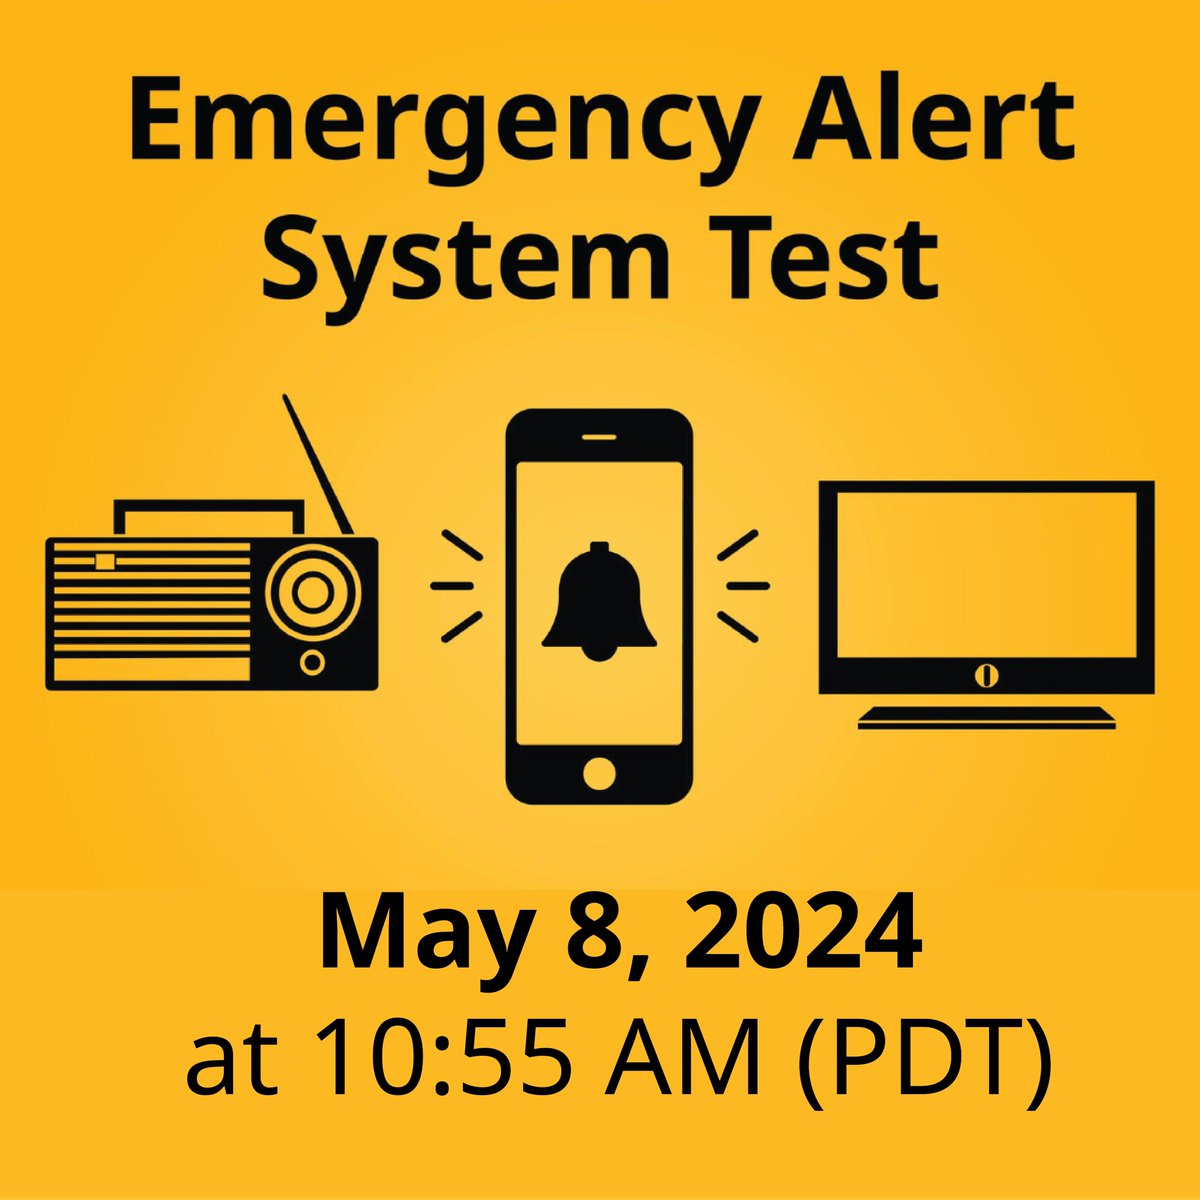 On Wed, May 8 at 10:55 AM (PDT), an emergency alert TEST will be issued. An alert tone & message will be sent to compatible cell phones, radio & TV. Learn what to do when you receive an Alert: www2.gov.bc.ca/gov/content/sa…